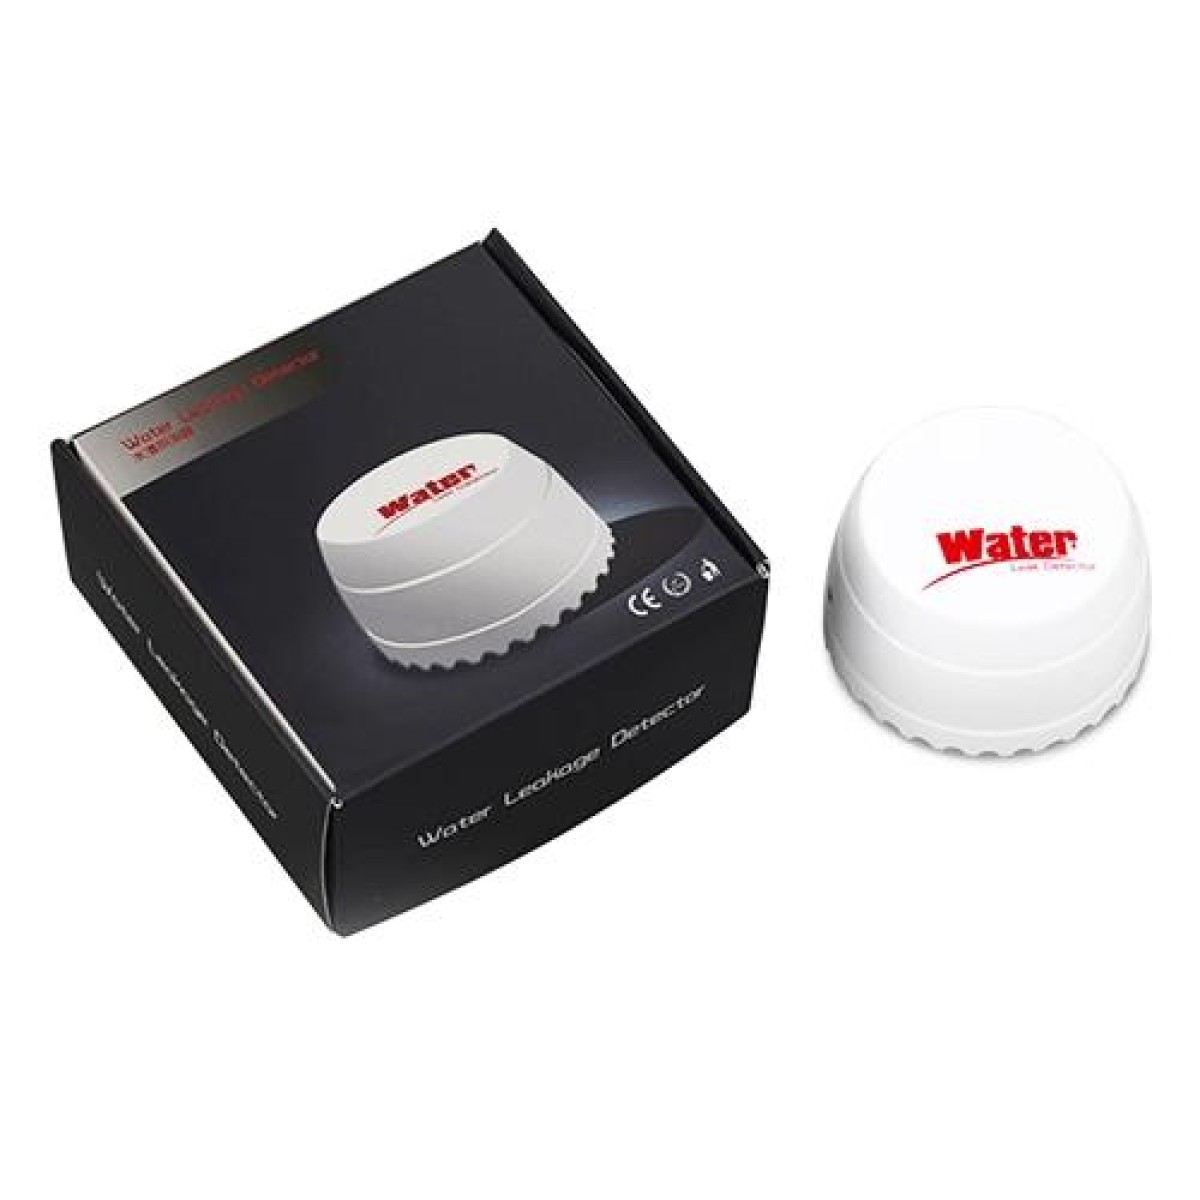 DY-SQ100B Water Leakage Detector with Two Sensors(White)